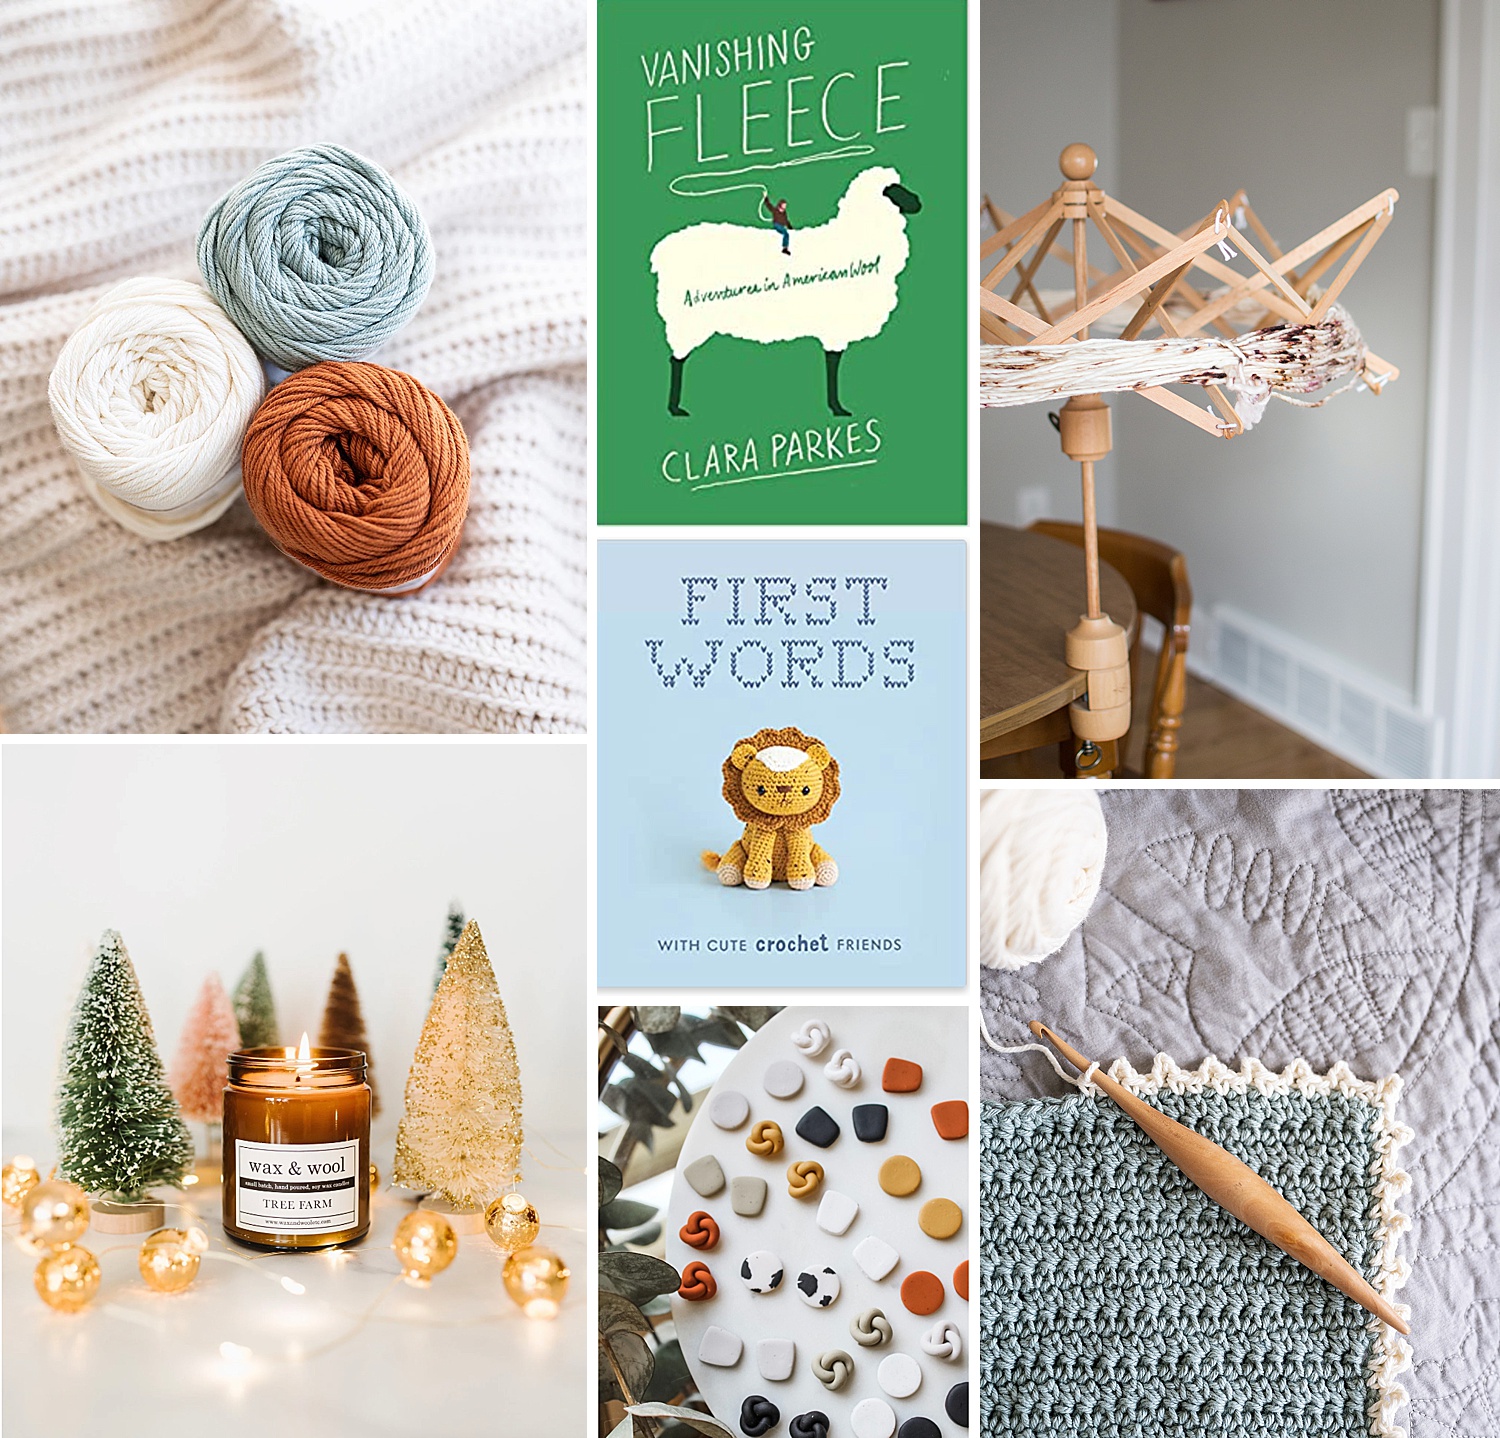 10 Gifts for Crocheters - Crochet Lovers Gift Guide - Jewels and Jones